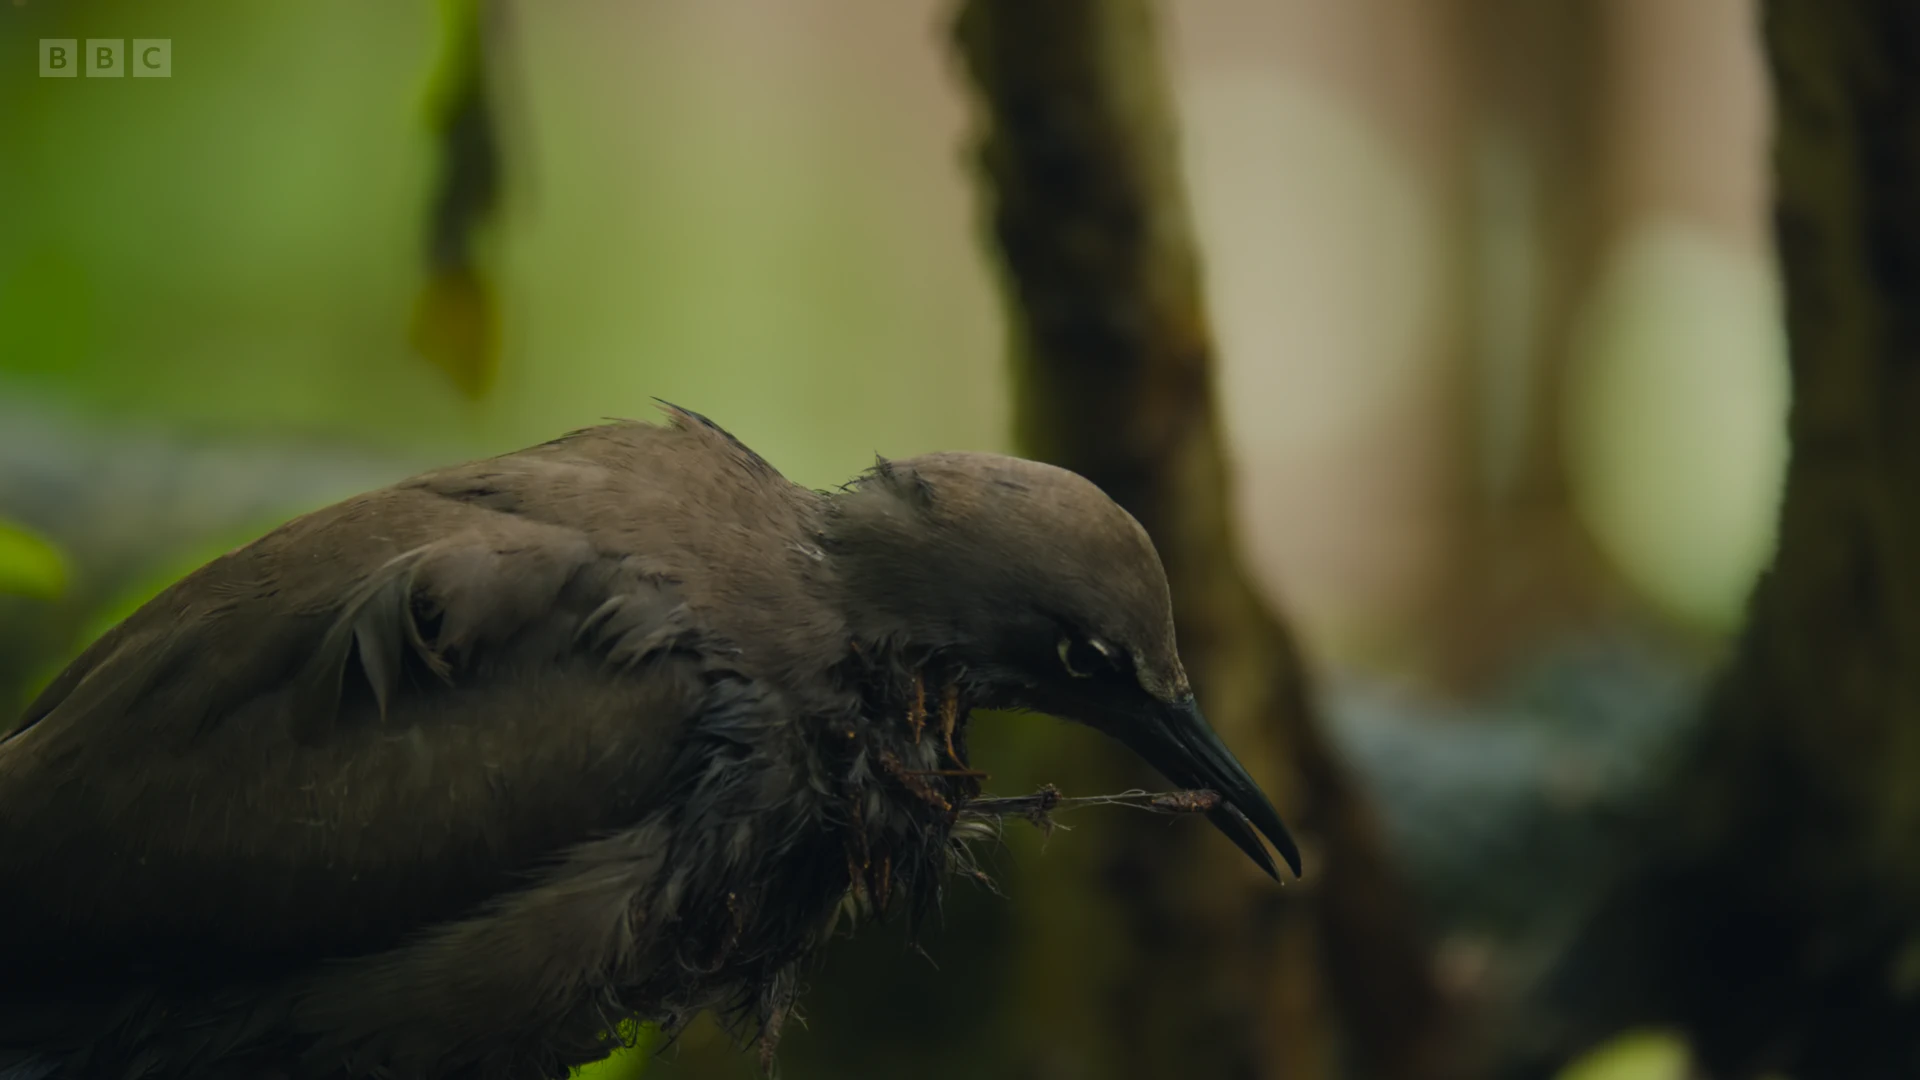 Brown noddy (Anous stolidus pileatus) as shown in Planet Earth II - Islands